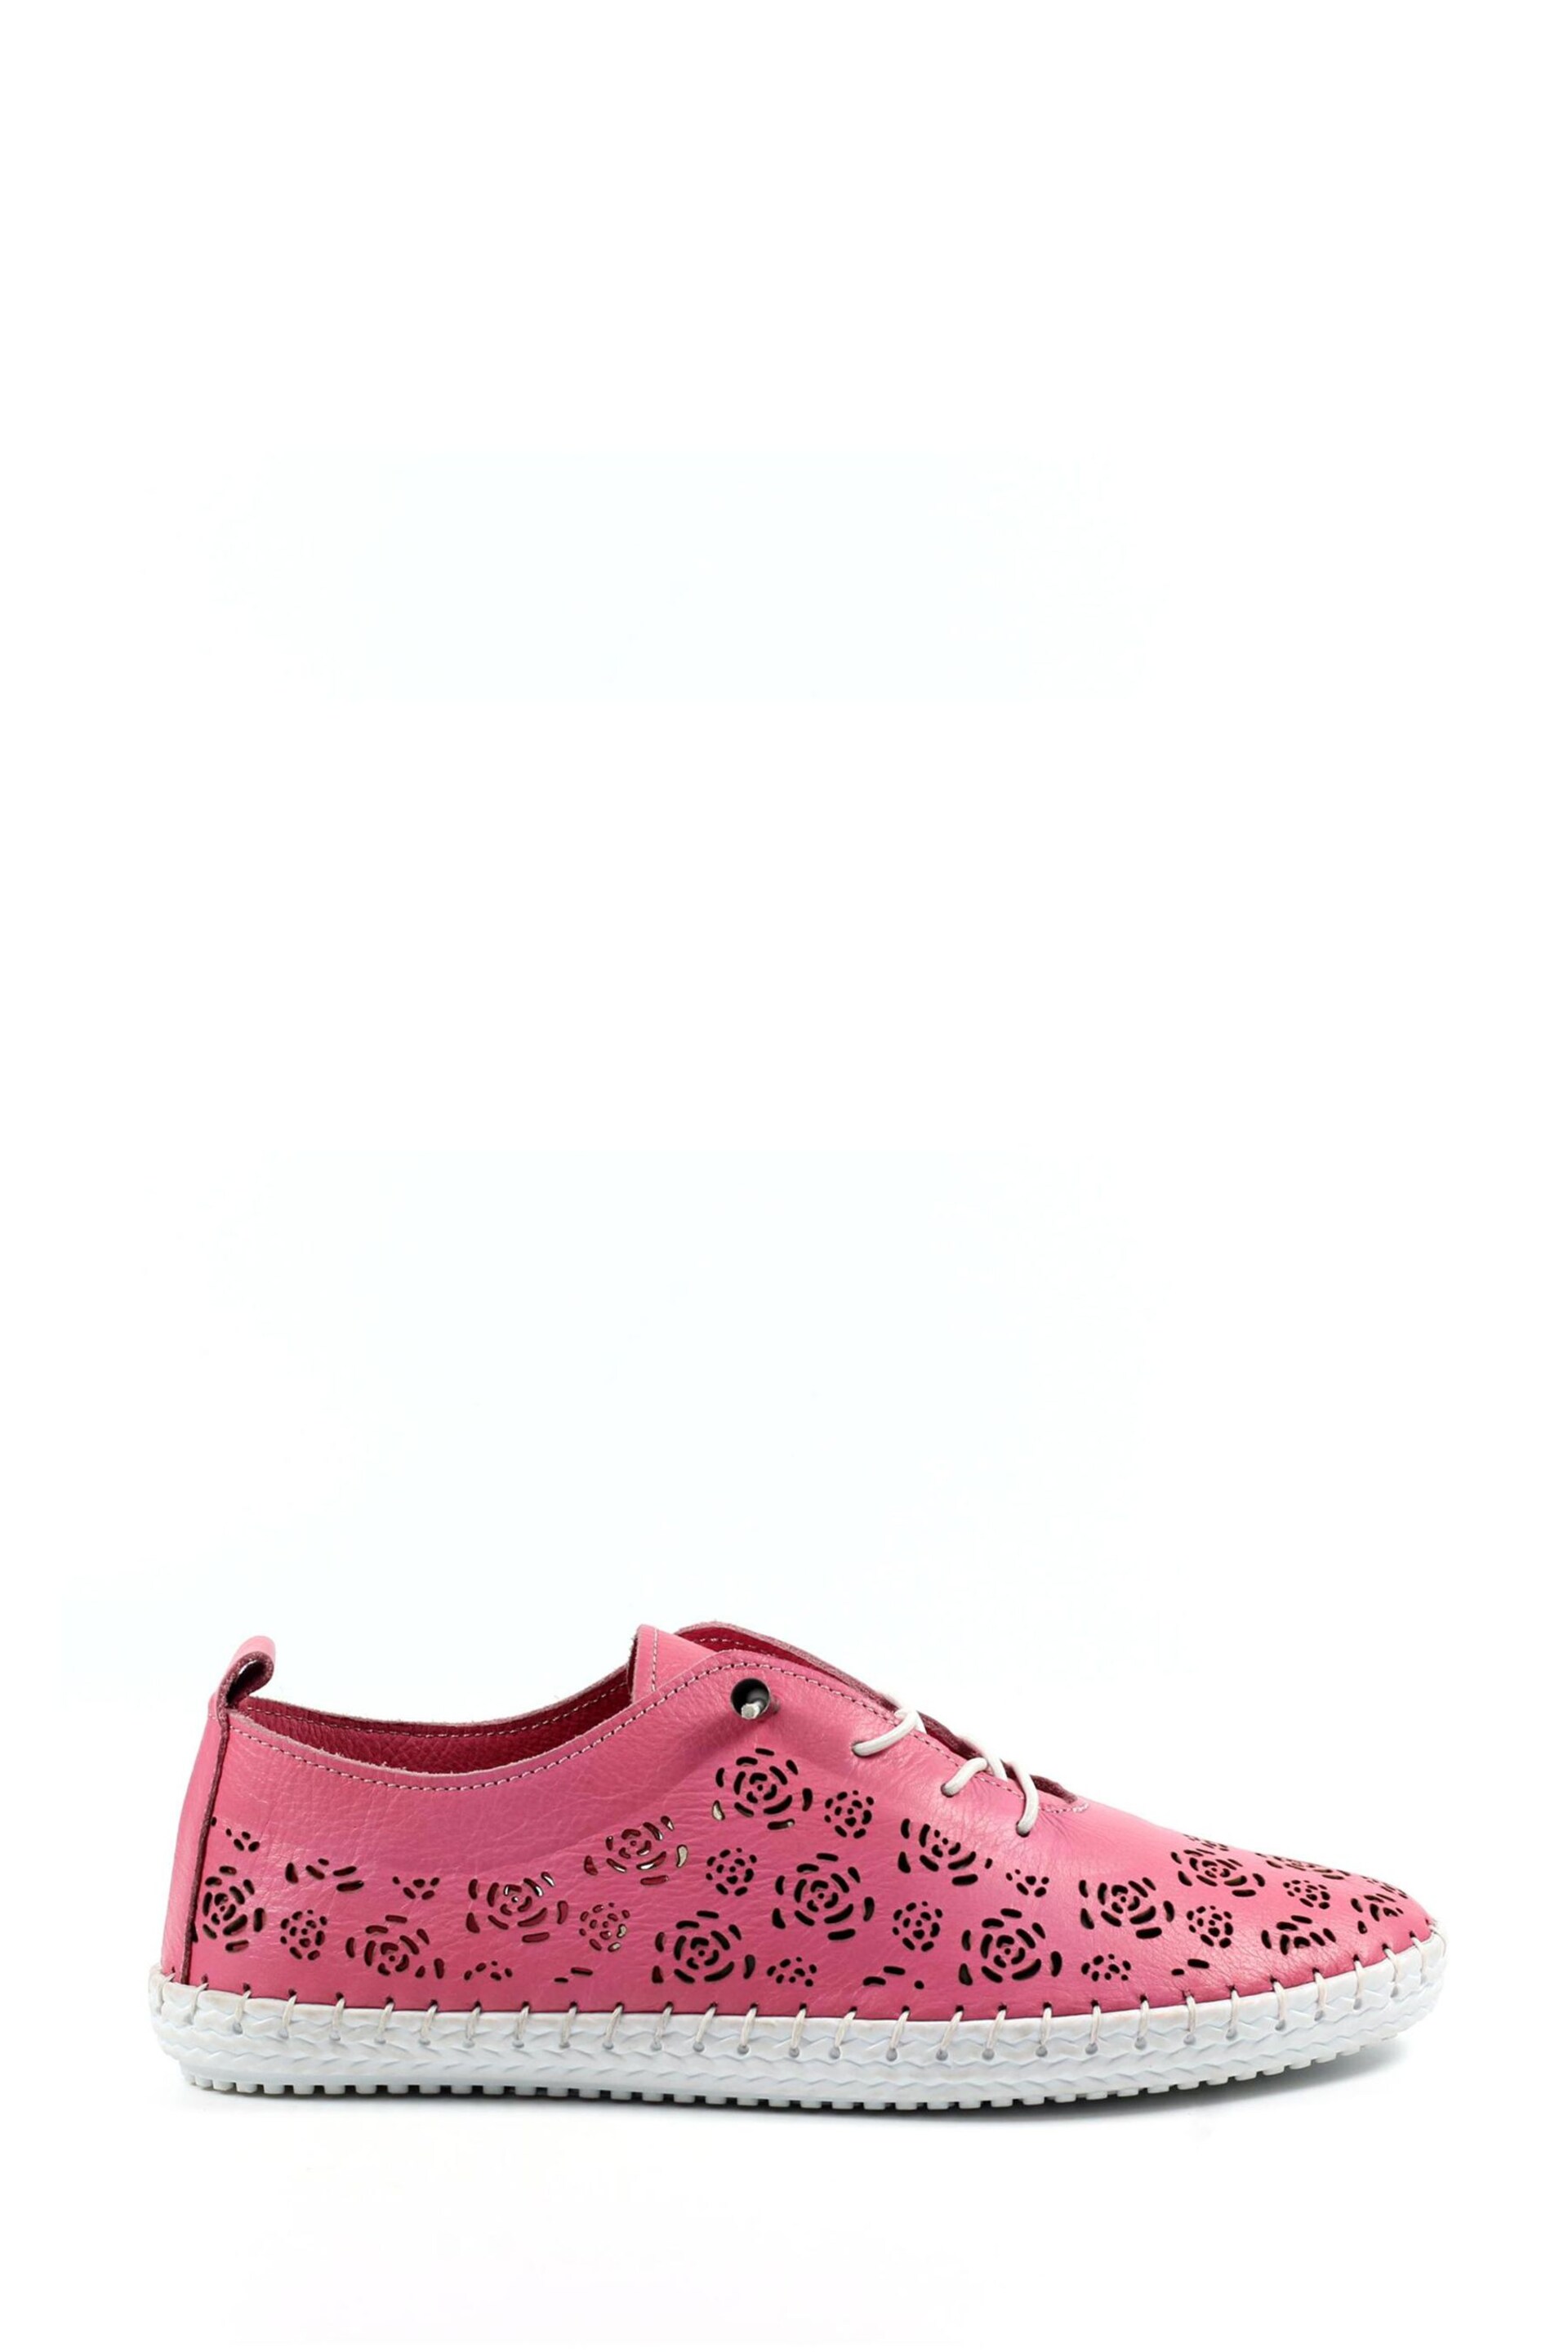 Lunar Bamburgh Leather Plimsoll Shoes - Image 1 of 2